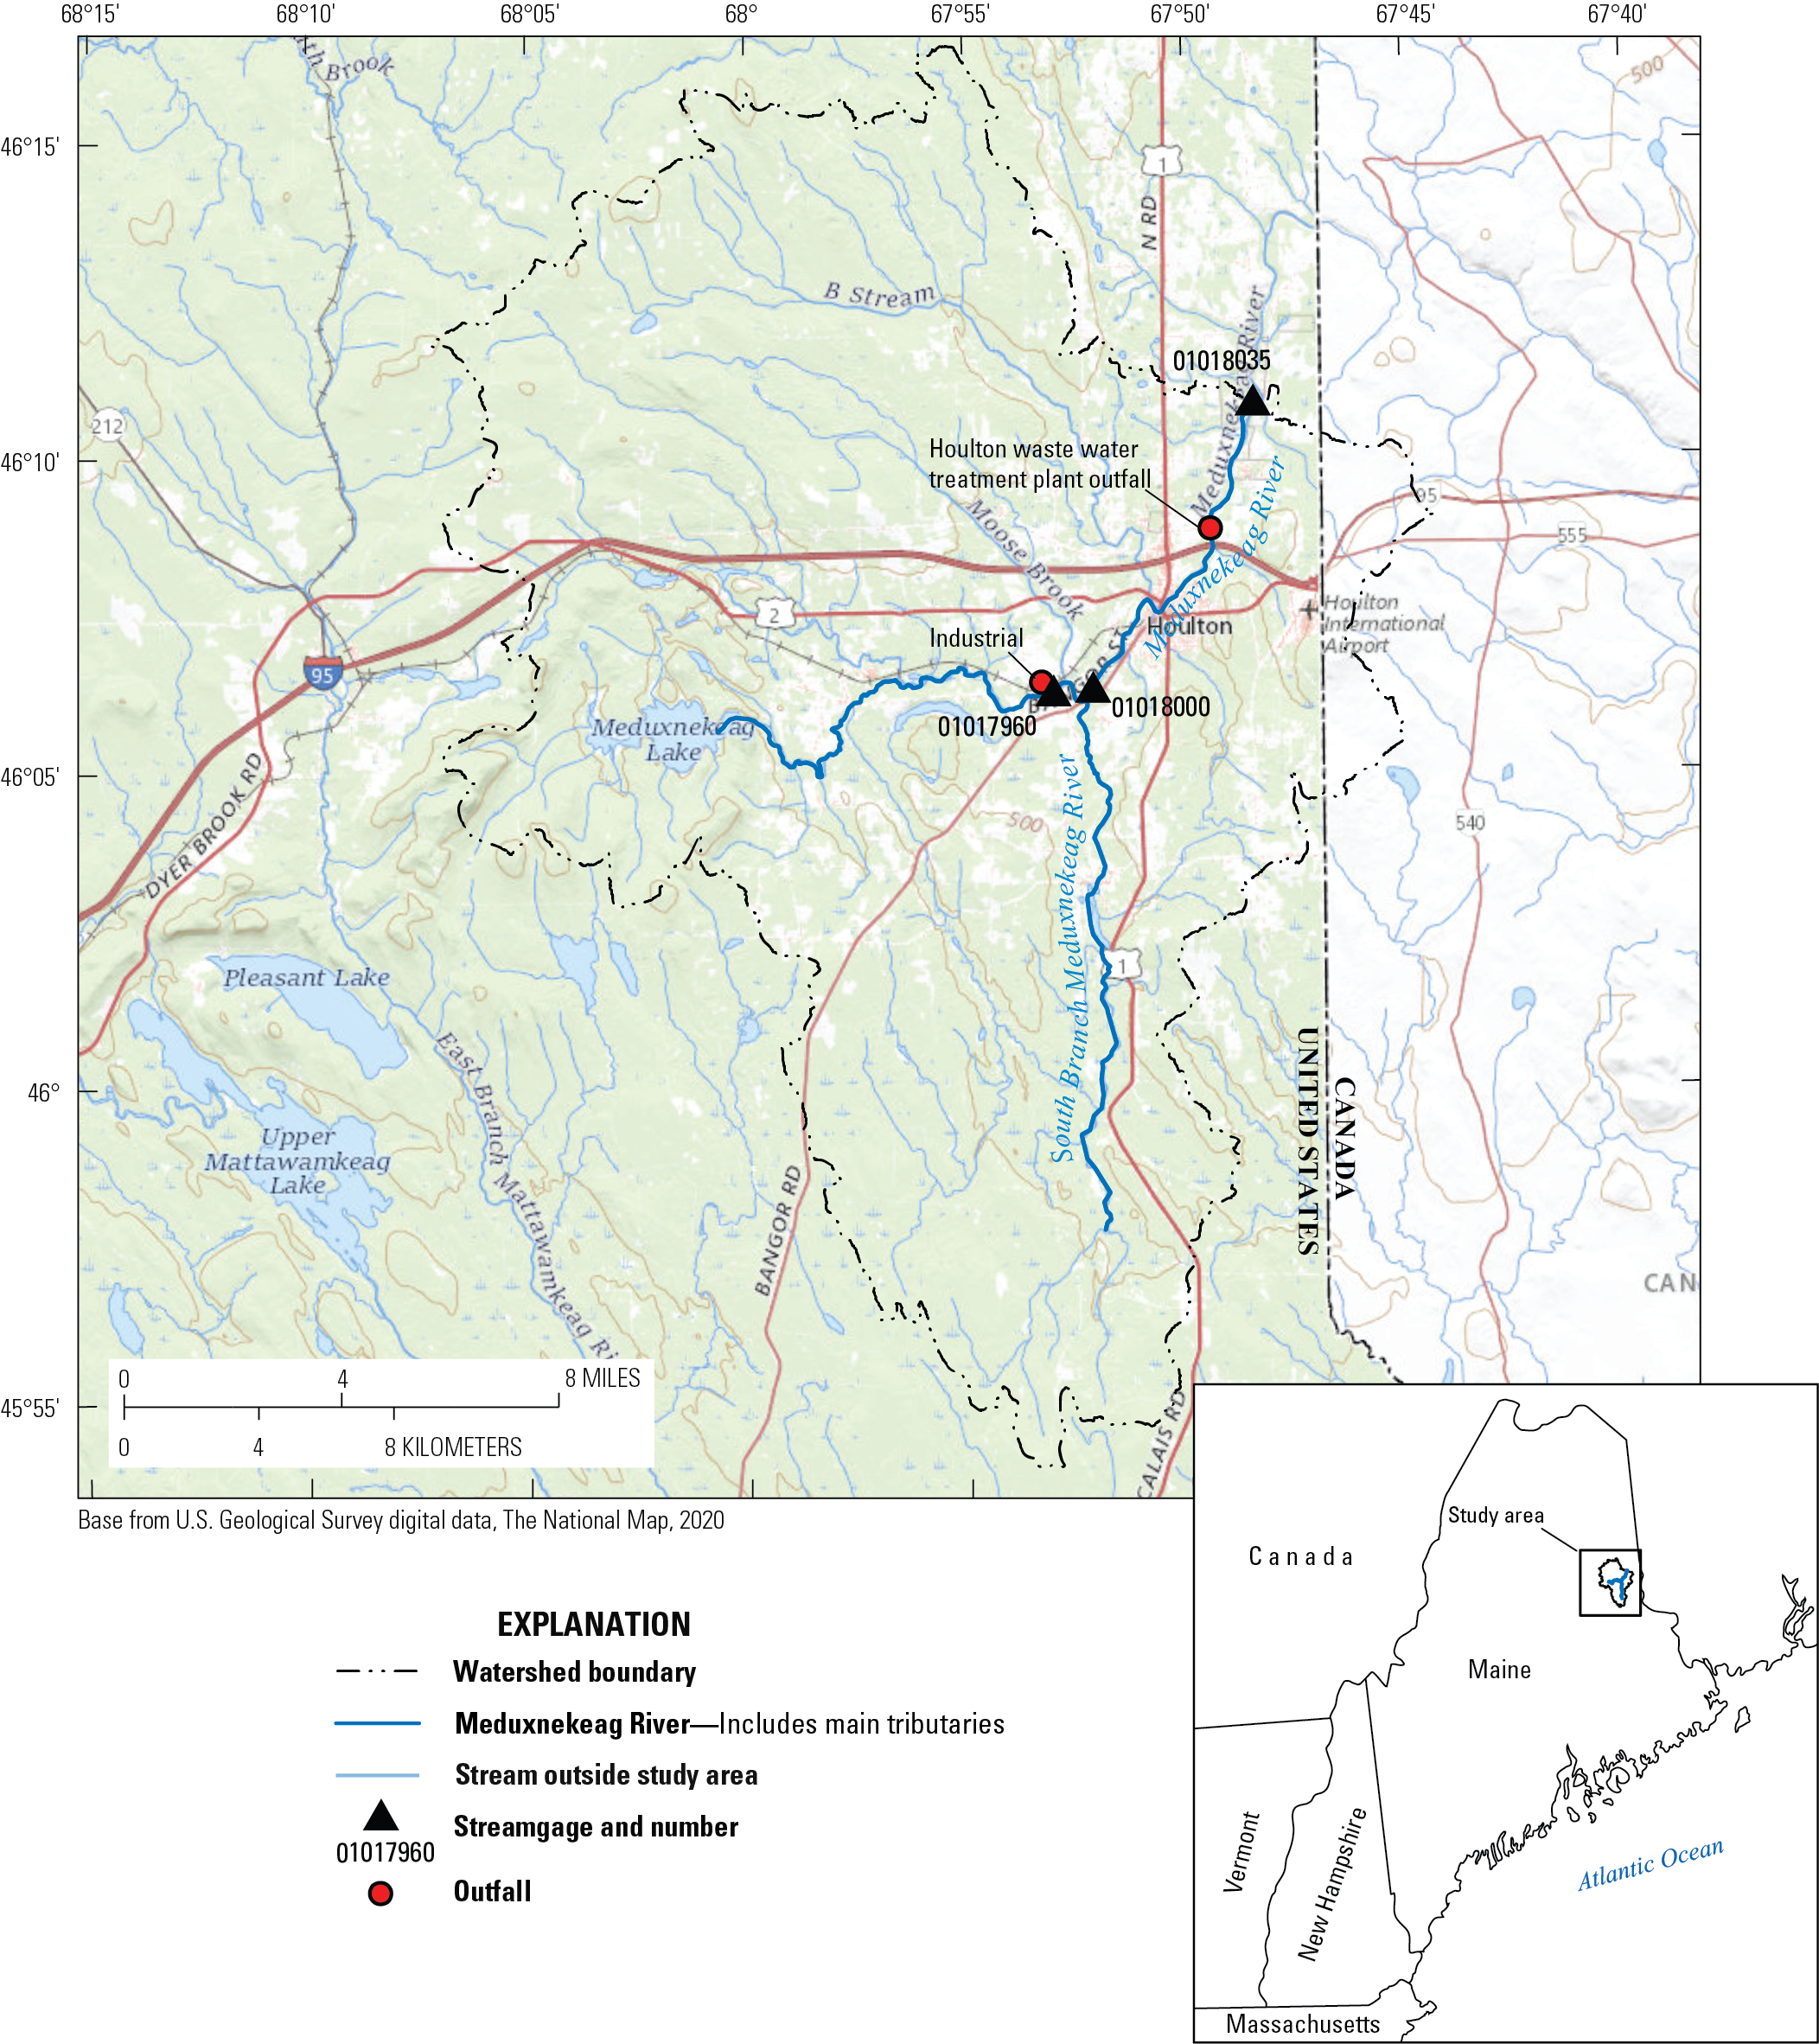 Triangles show streamgages, and dots show outfalls in the Meduxnekeag River watershed,
                           Maine.